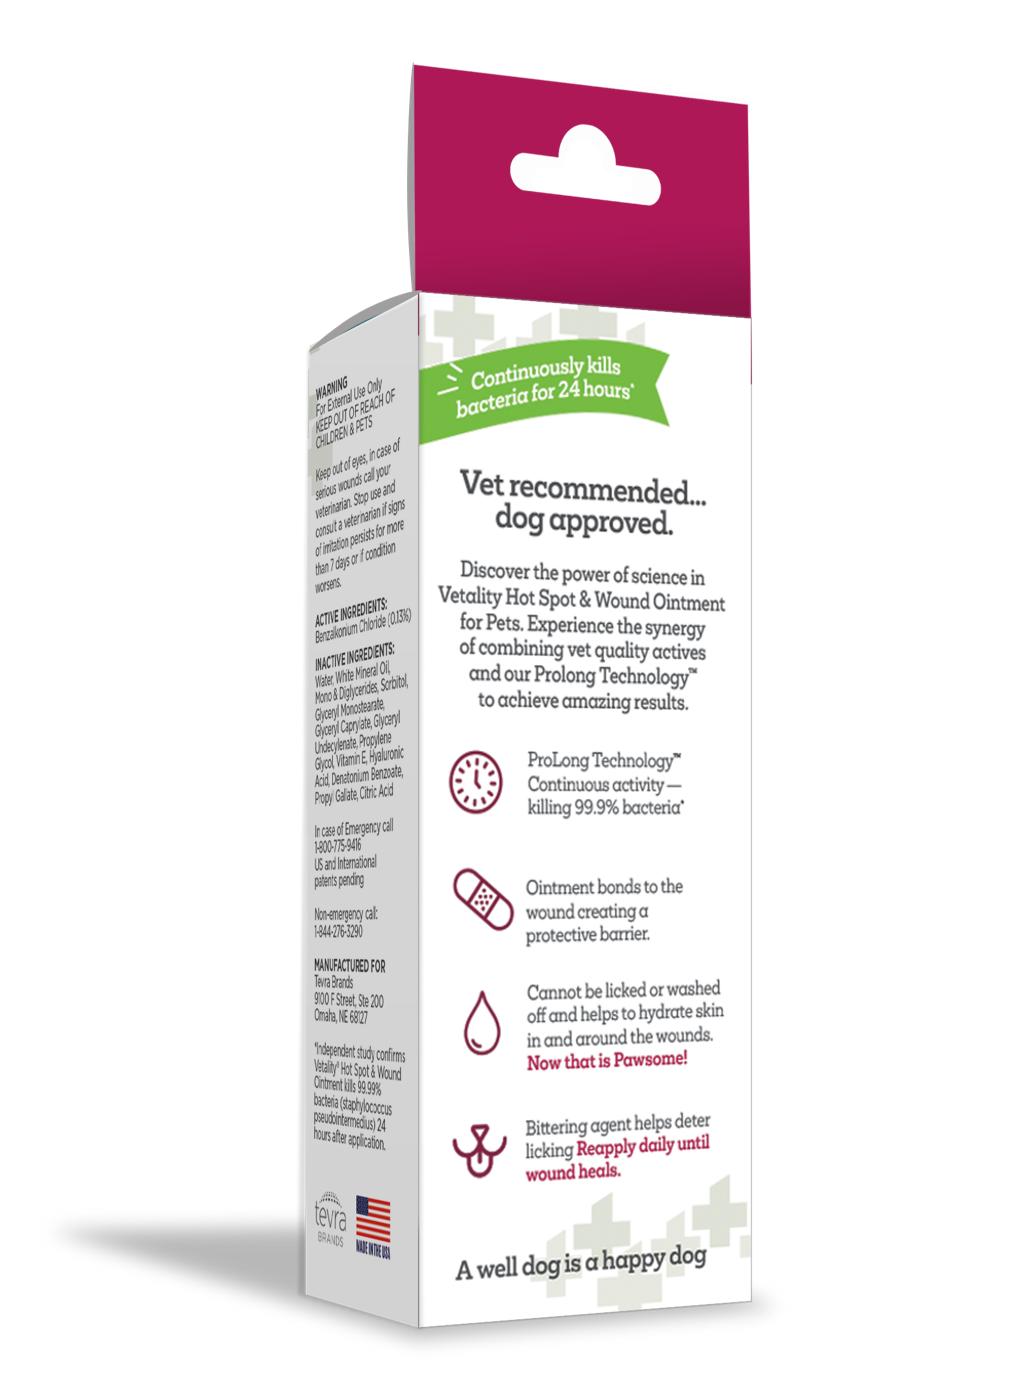 Vetality Hot Spot & Wound Ointment for Pets; image 2 of 2